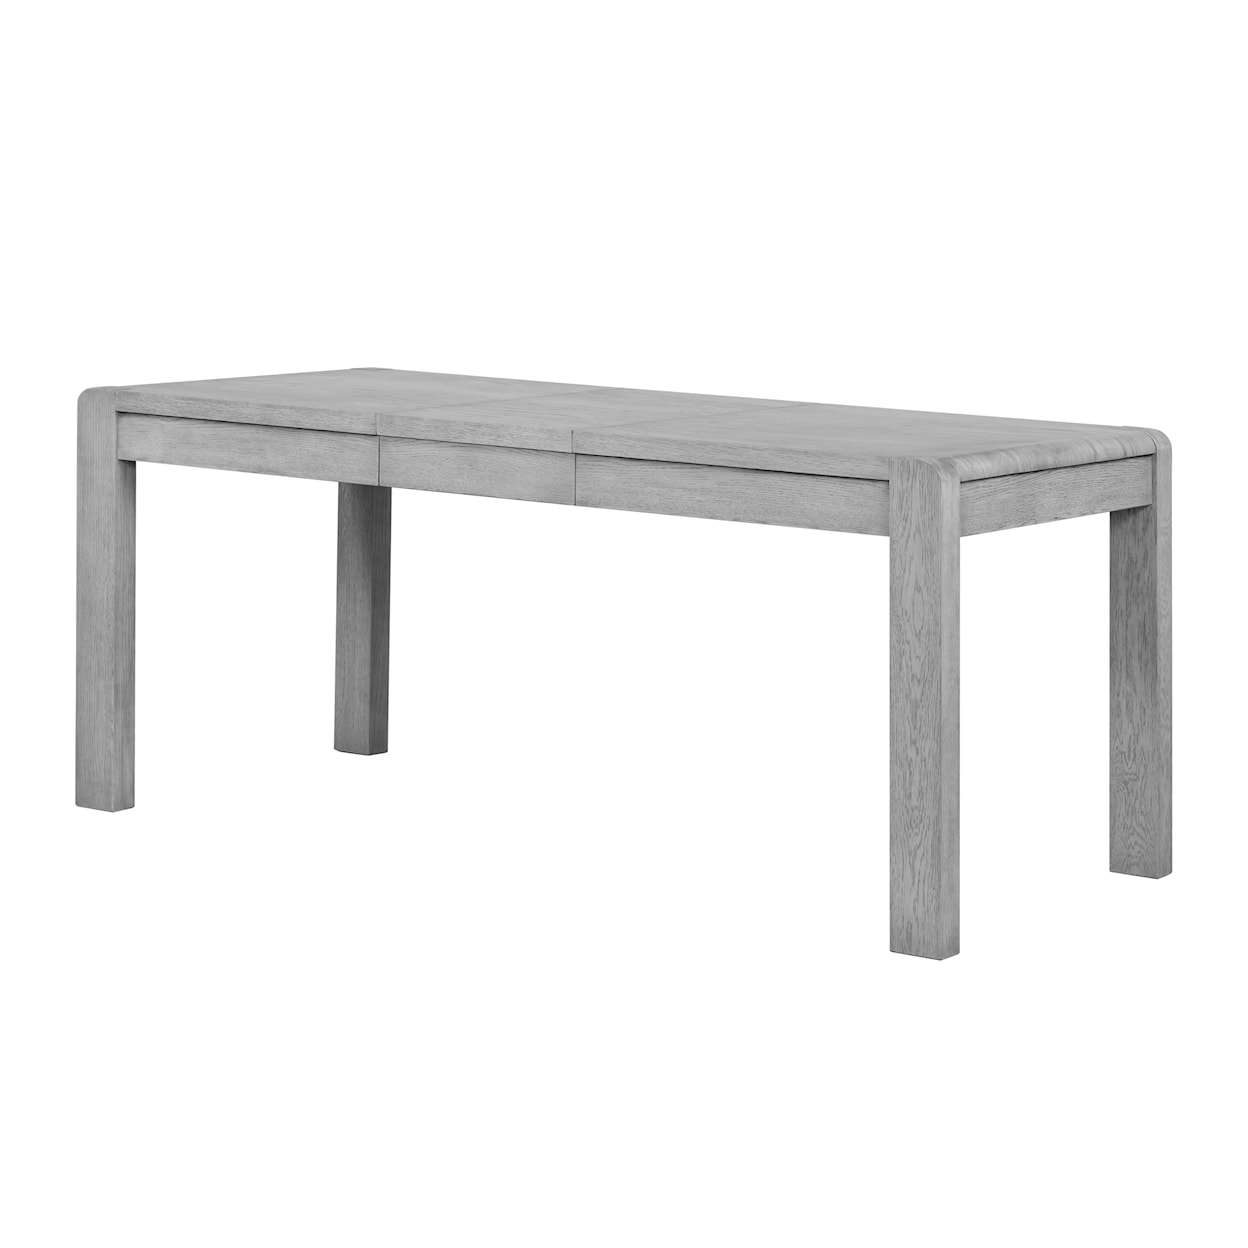 Global Home Amsterdam Compact Extension Dining Table